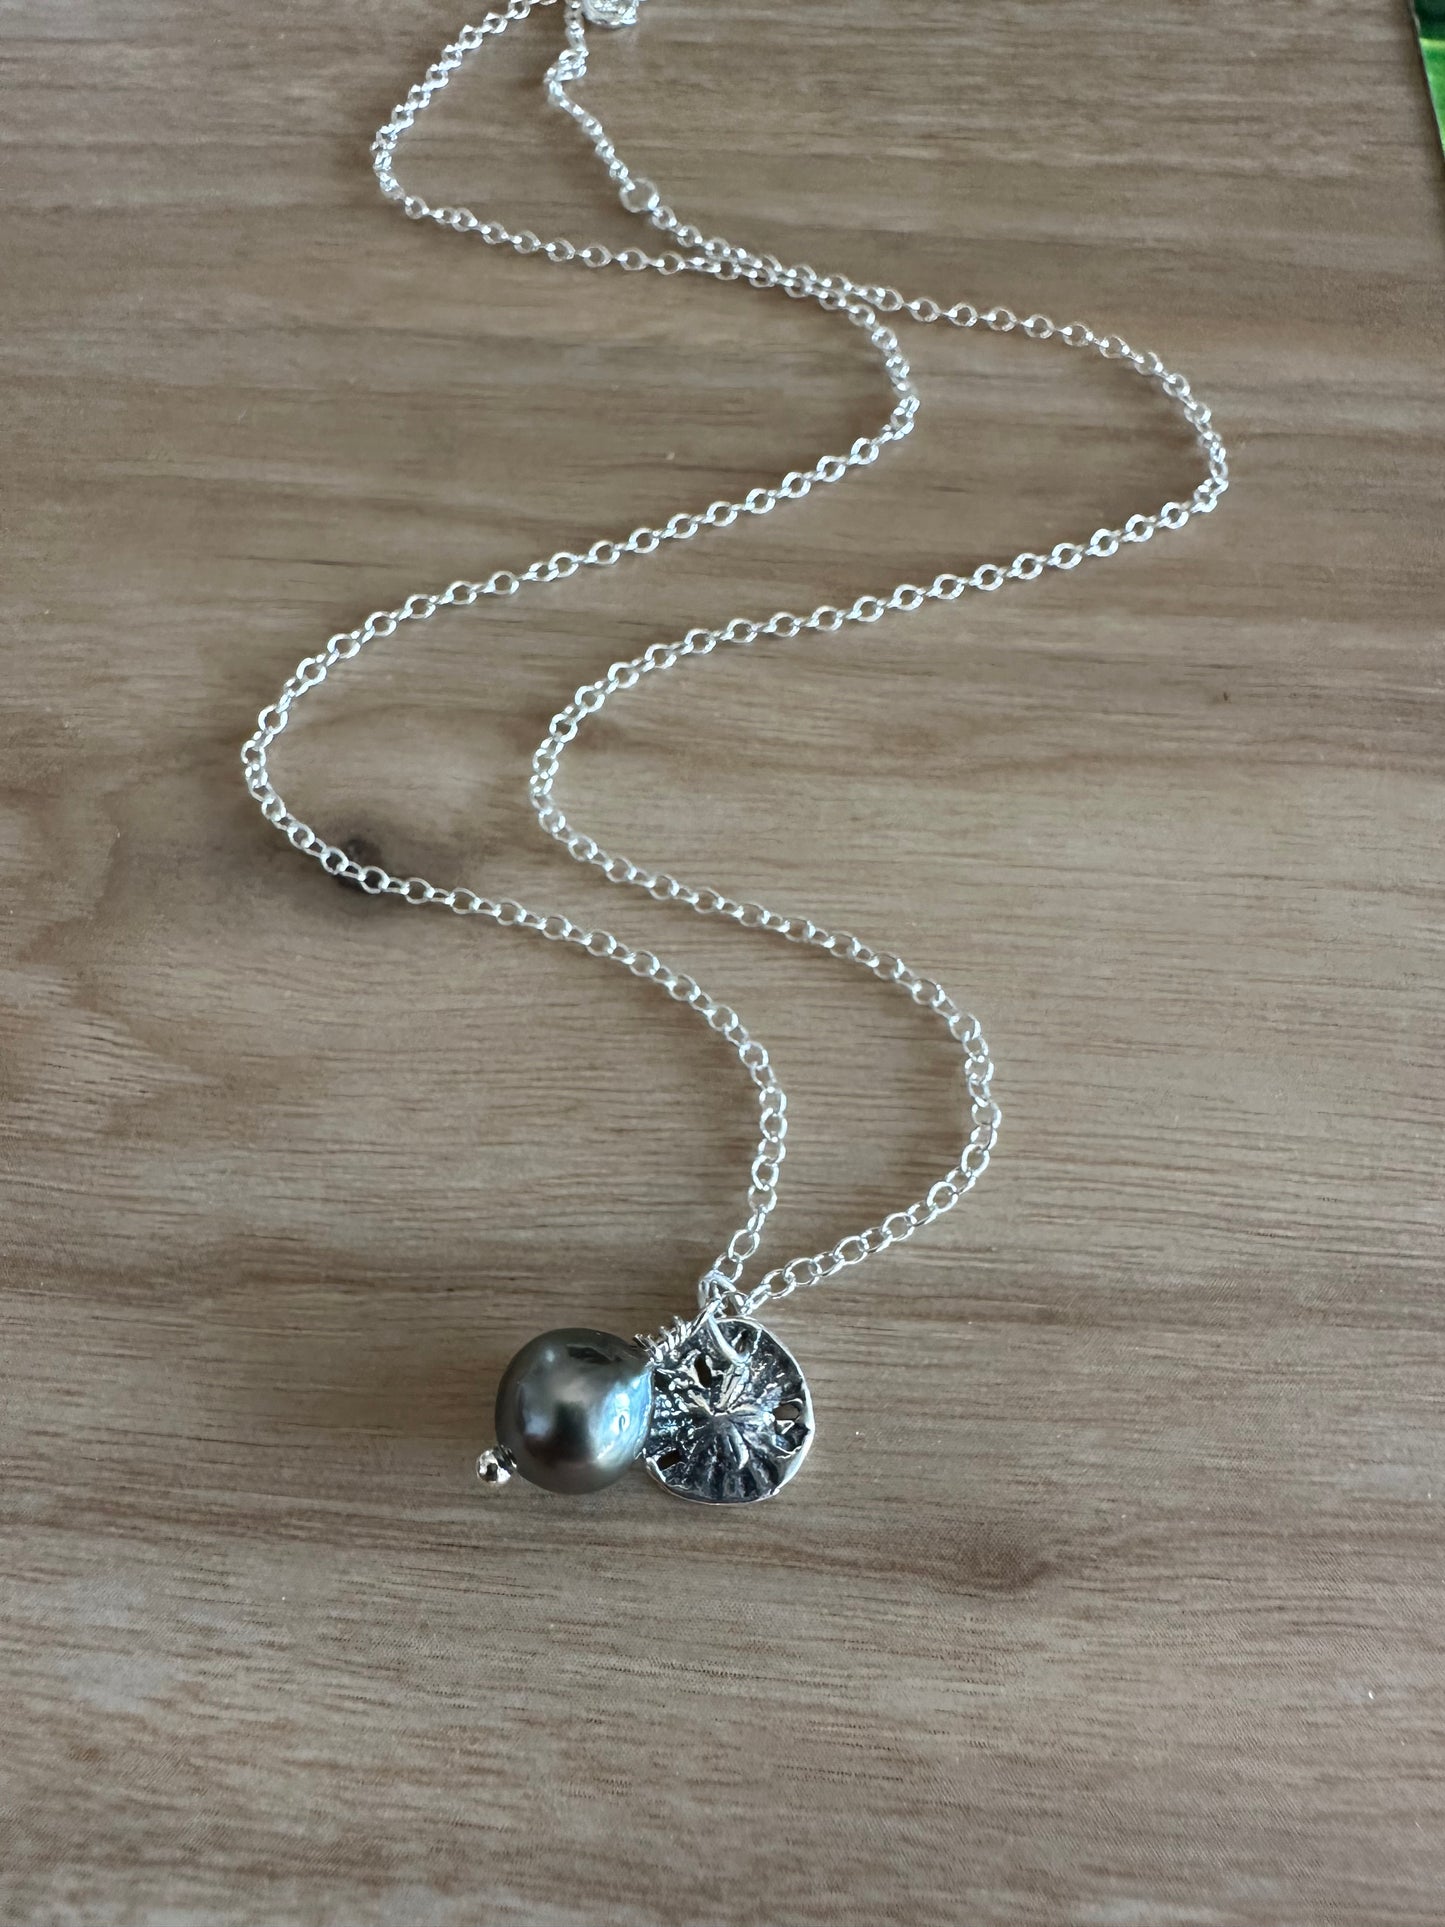 Summer Swing: Tahitian Pearl and Sterling Silver Beach Necklace